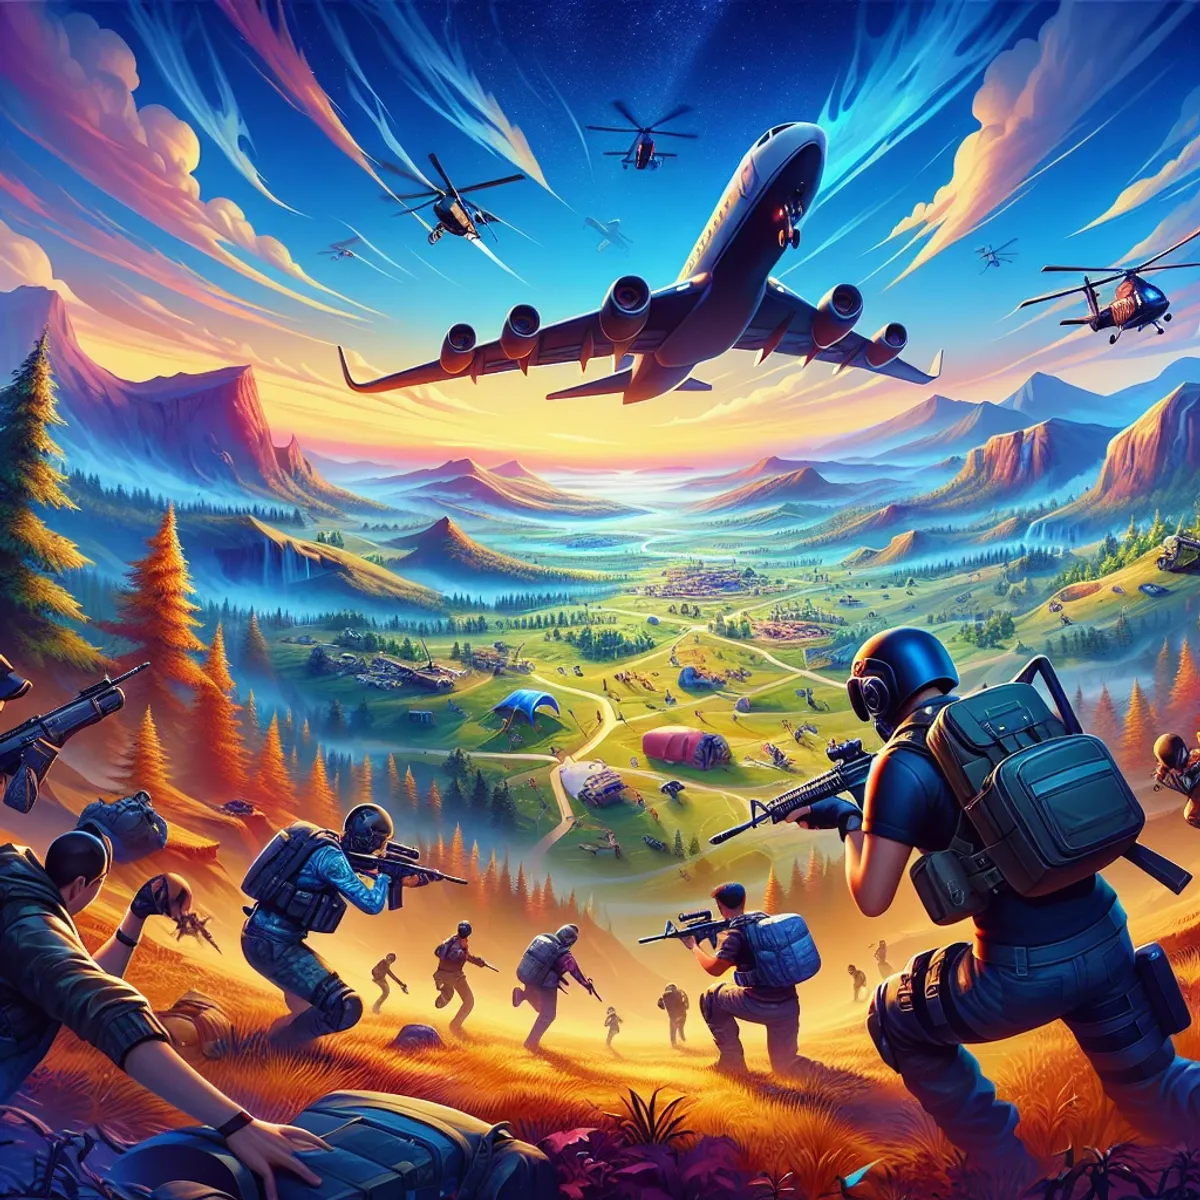 Aerial view of a battle royale game with players parachuting into a vibrant wilderness, wielding unique weapons, and a newly updated map in the distance.